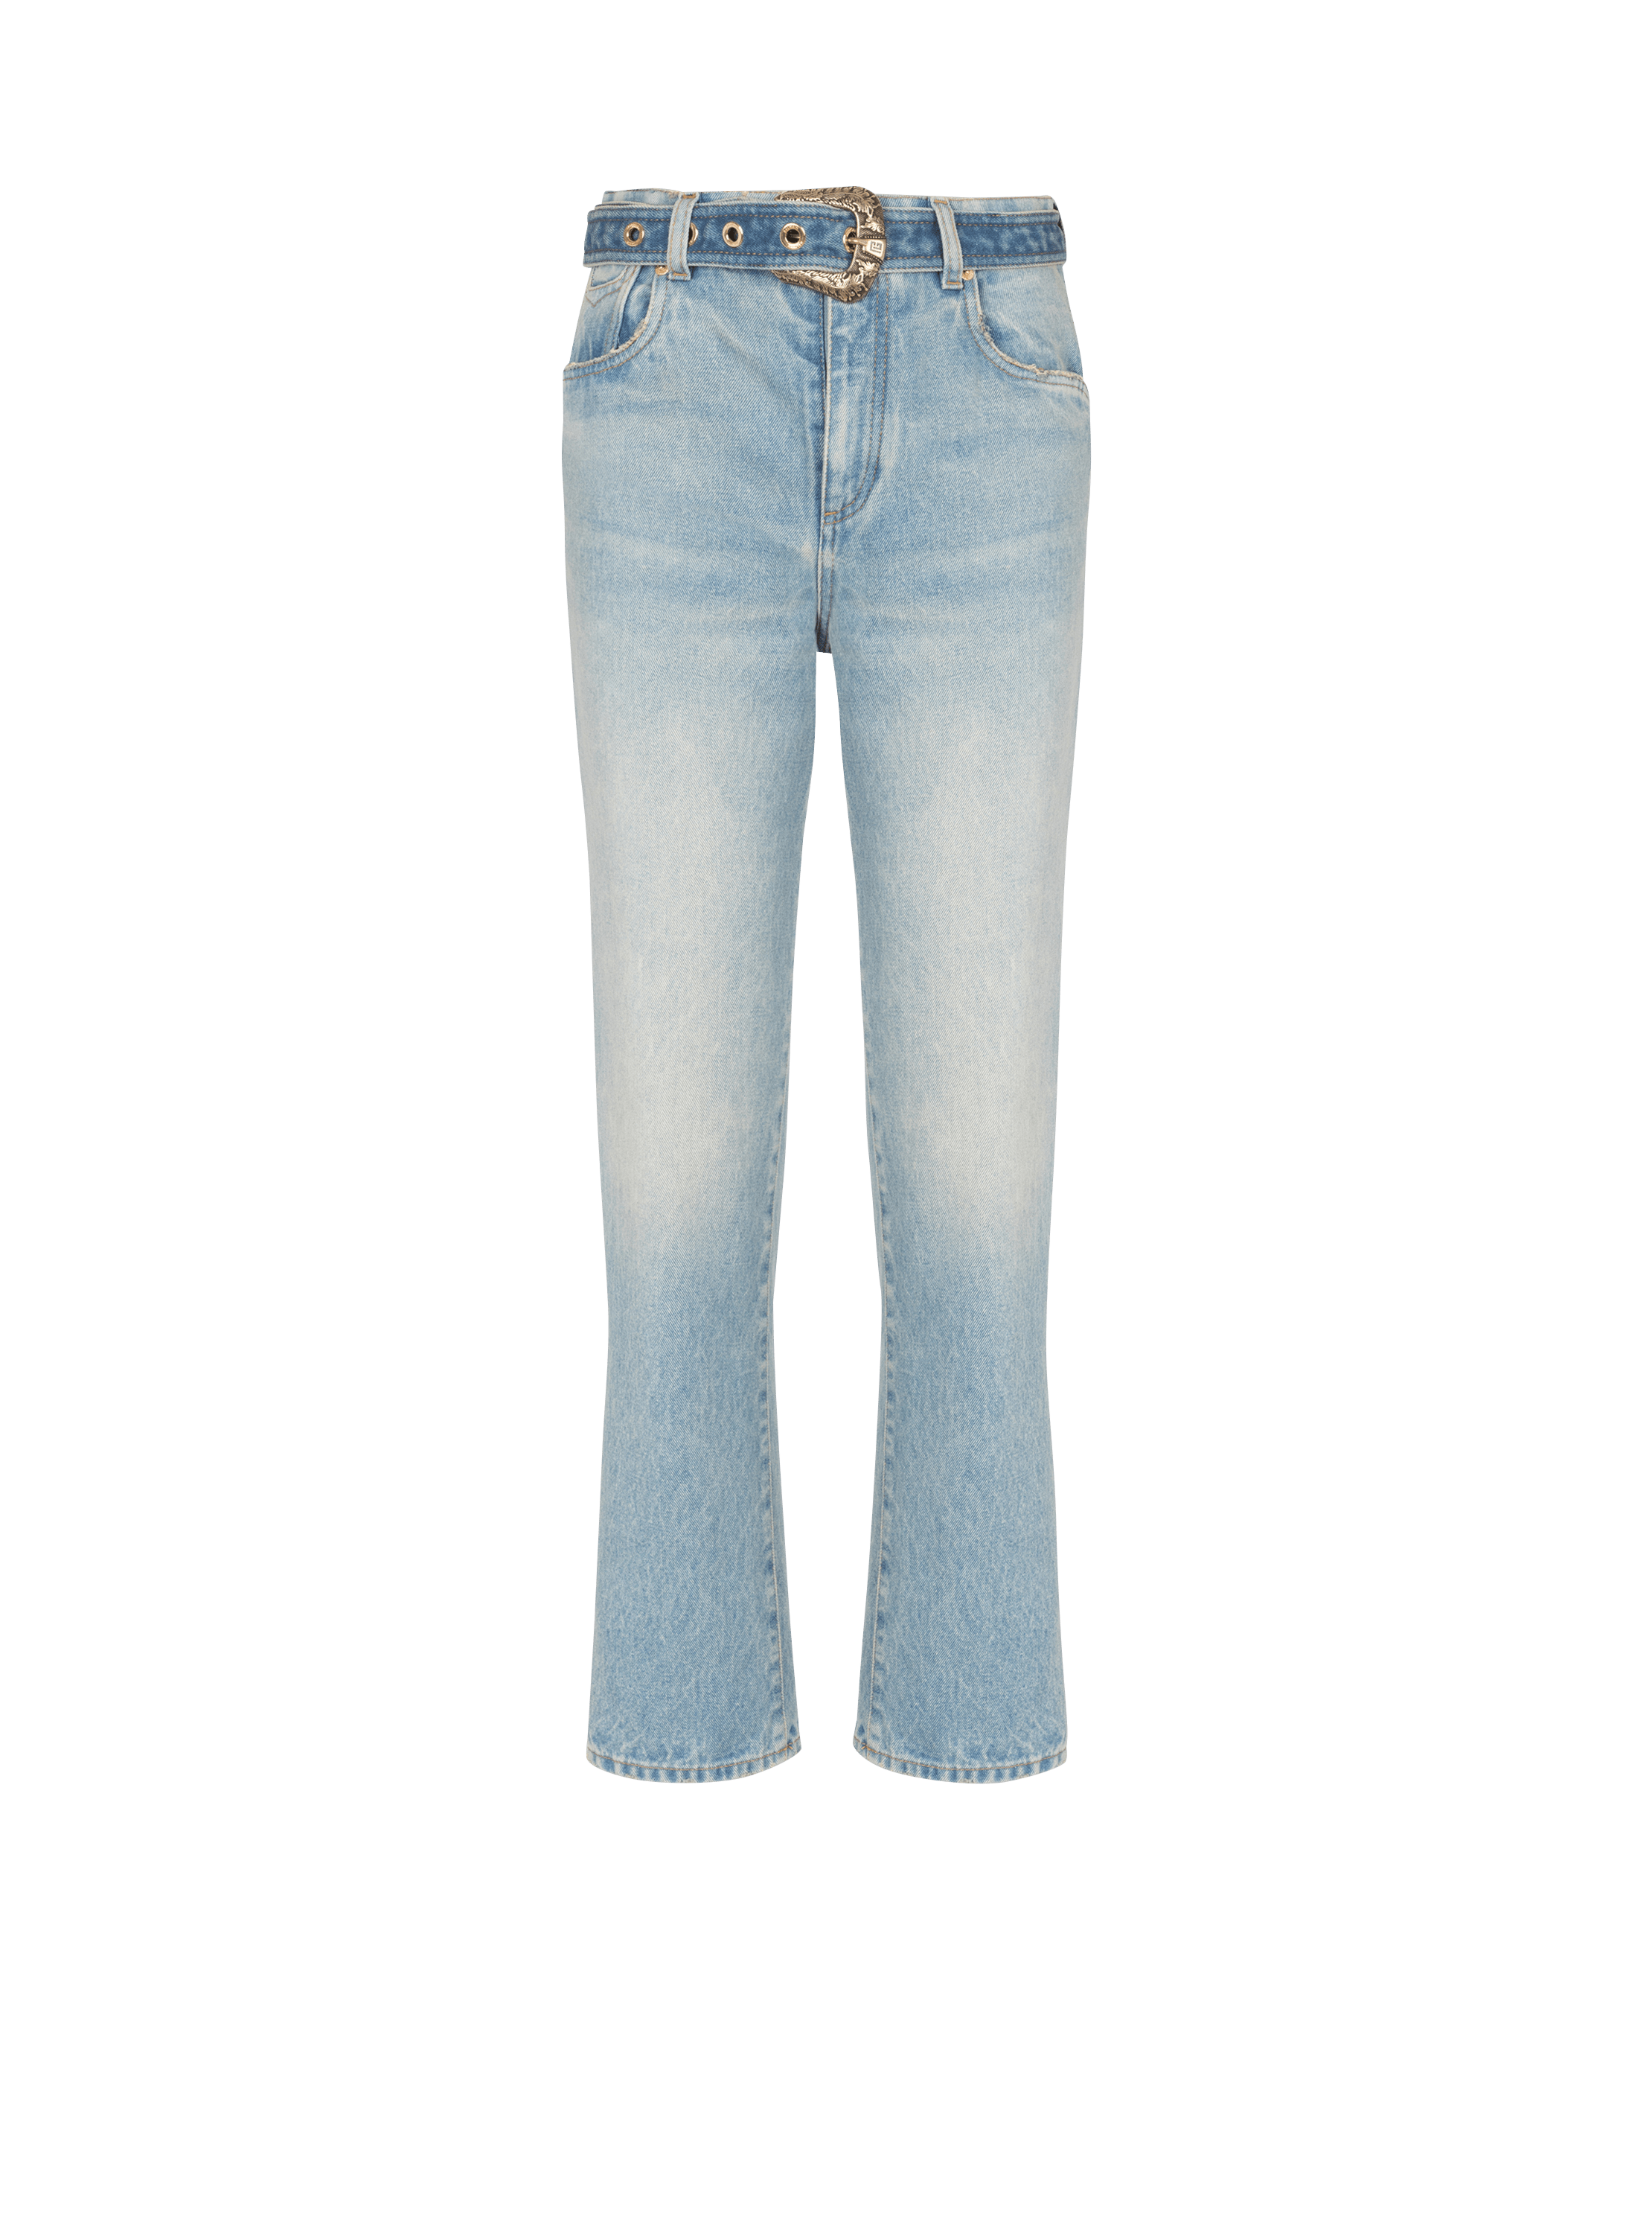 Classic belted jeans